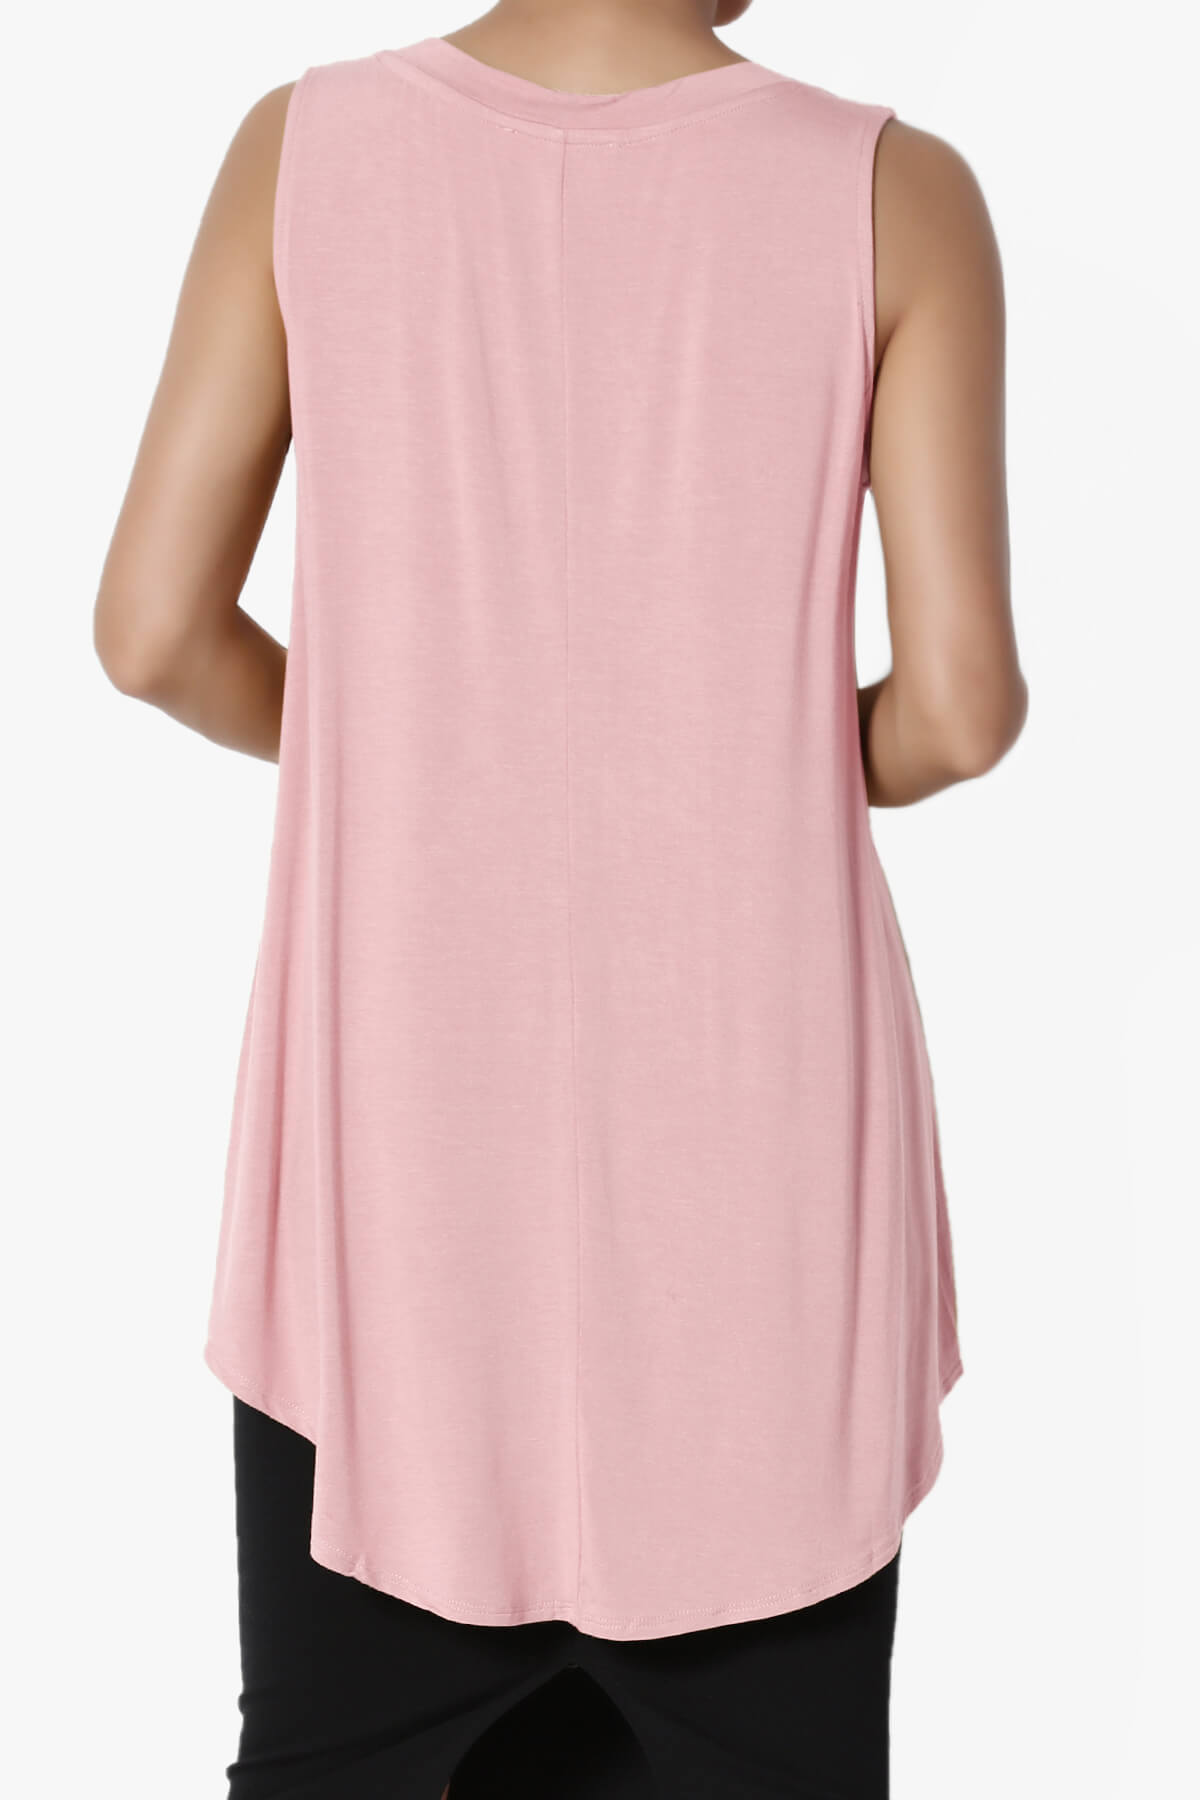 Load image into Gallery viewer, Myles Sleeveless V-Neck Luxe Jersey Top DUSTY PINK_2
